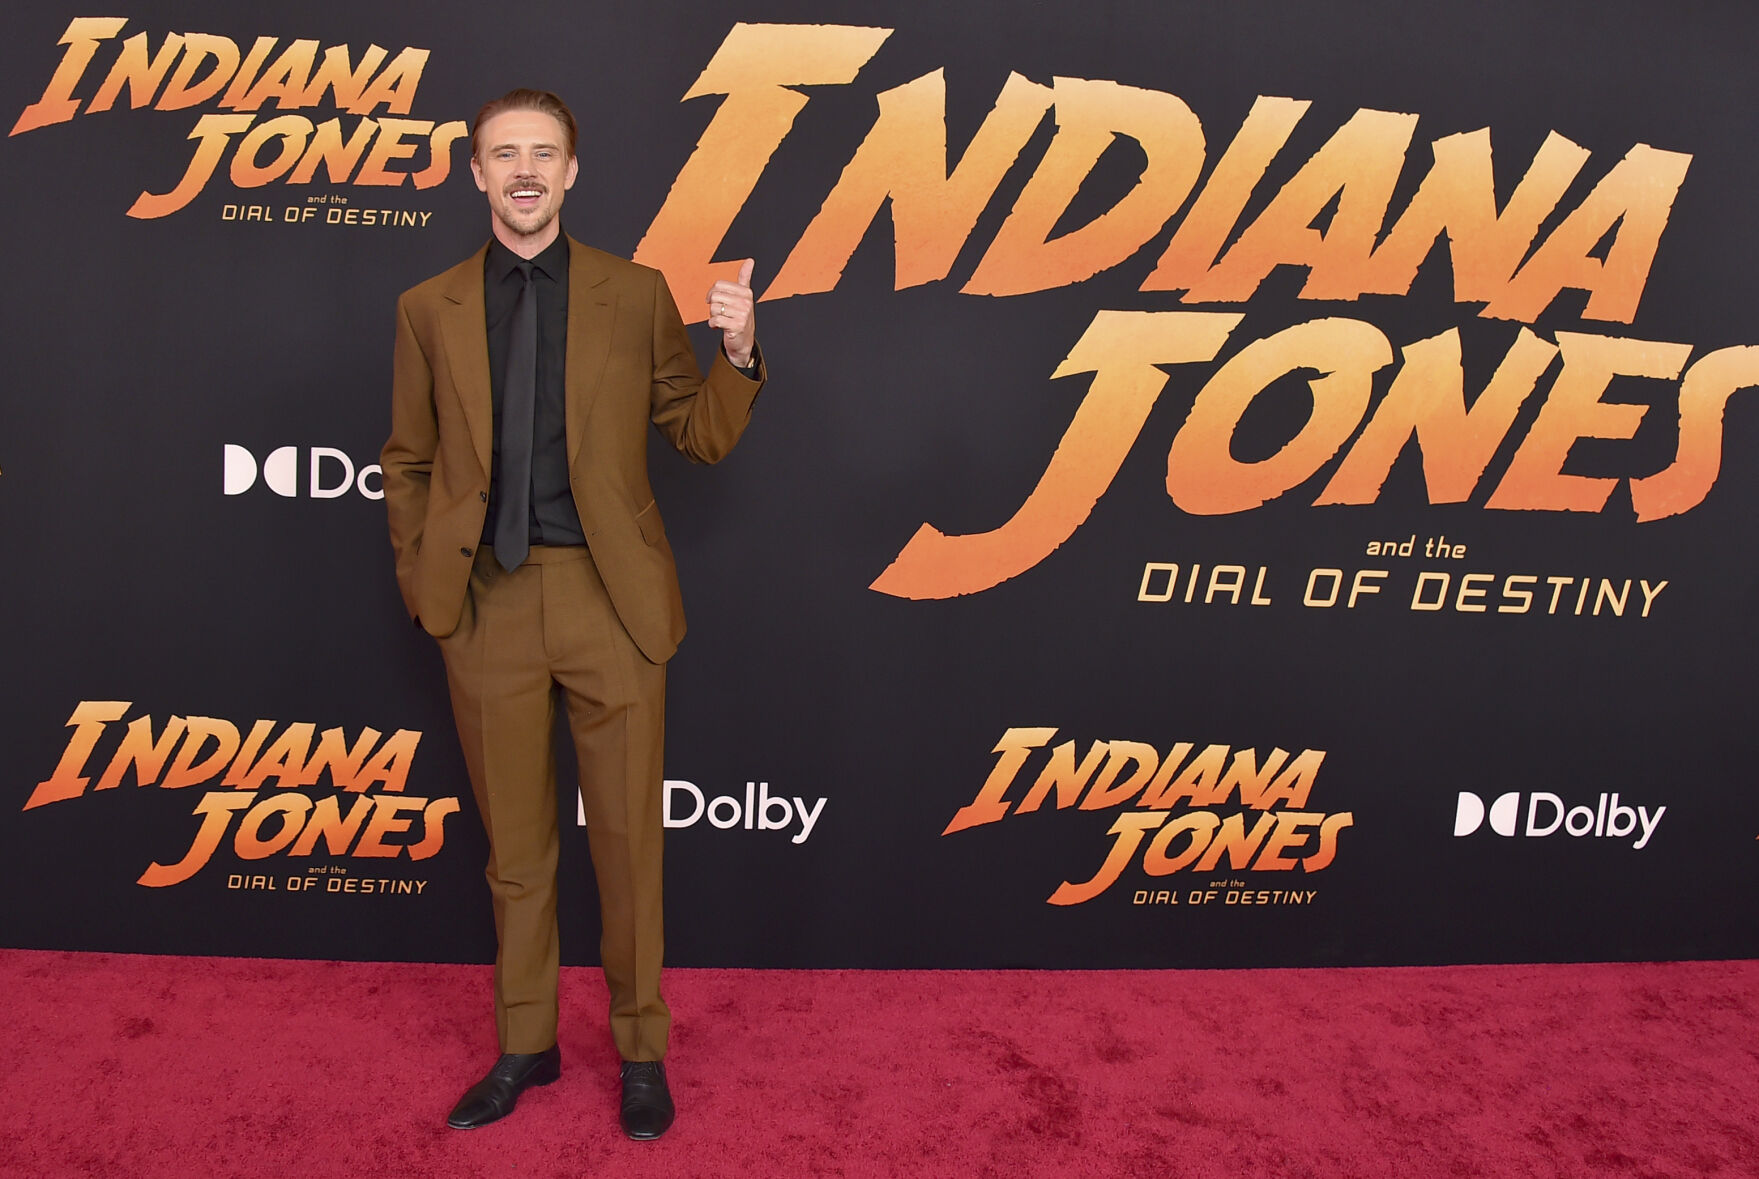 Boyd Holbrook arrives at the premiere of "Indiana Jones and the Dial of Destiny," Wednesday, June 14, 2023, at El Capitan Theatre in Los Angeles.